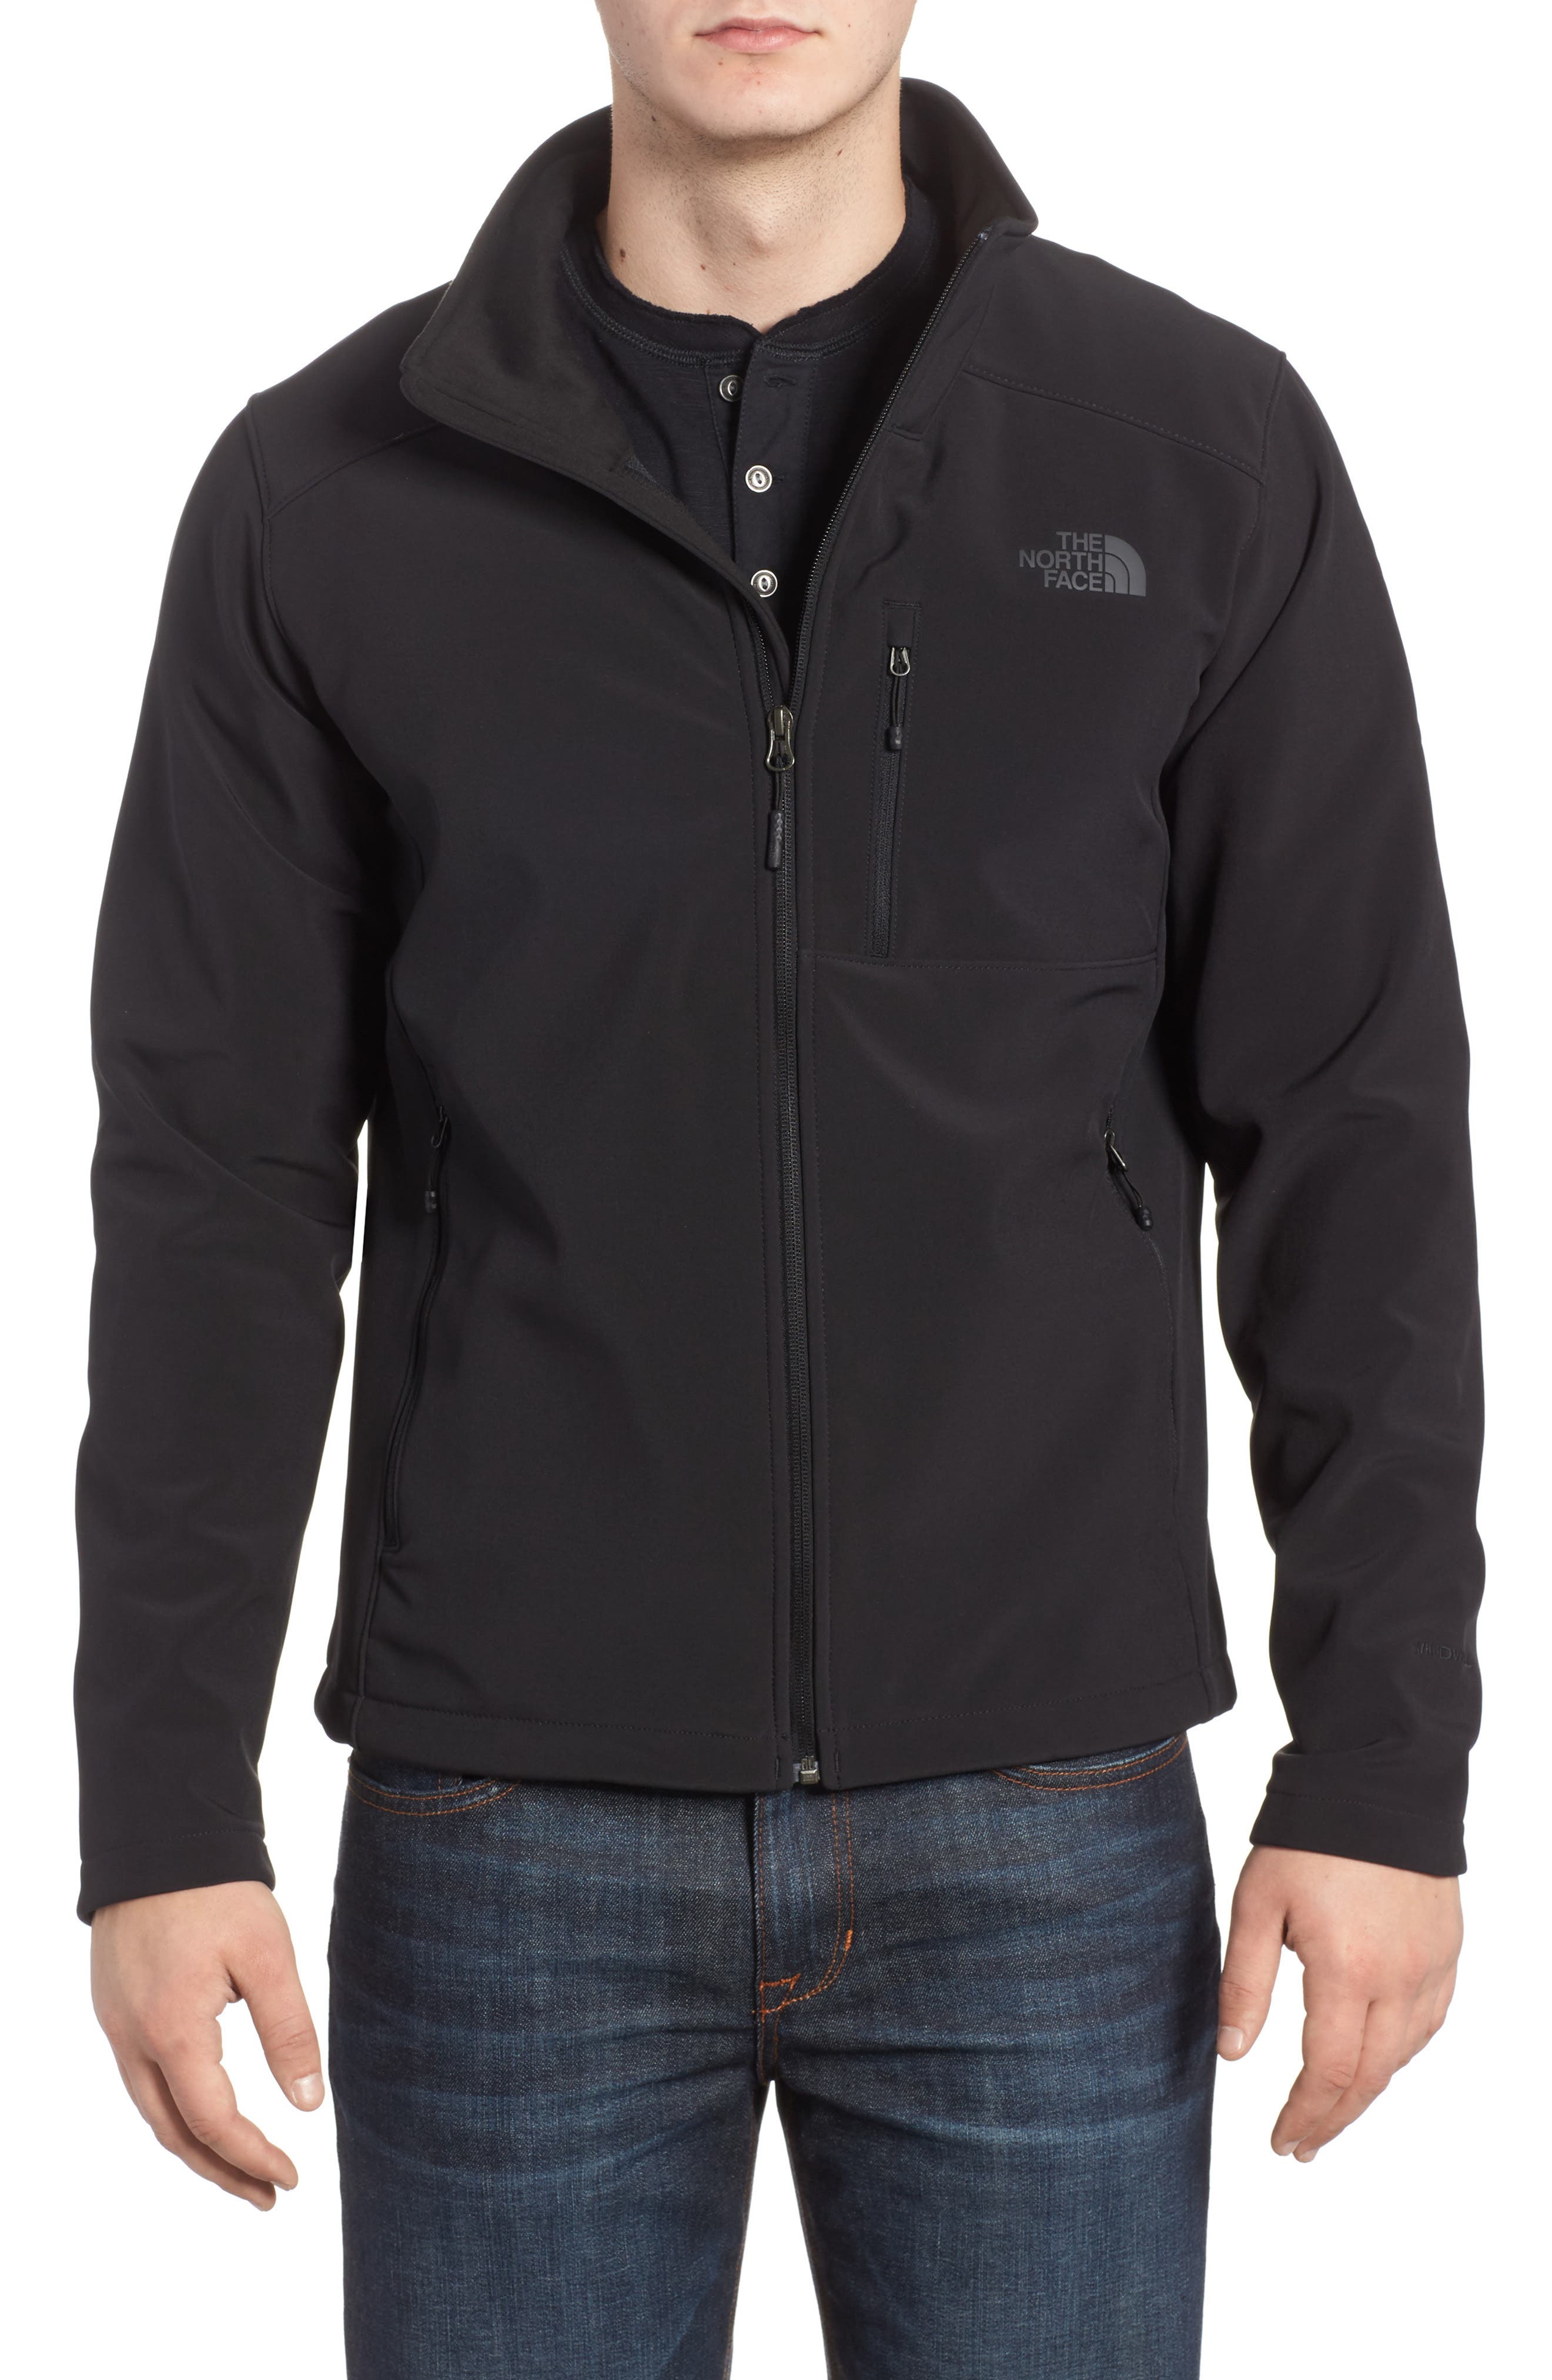 north face apex bionic 2 jacket